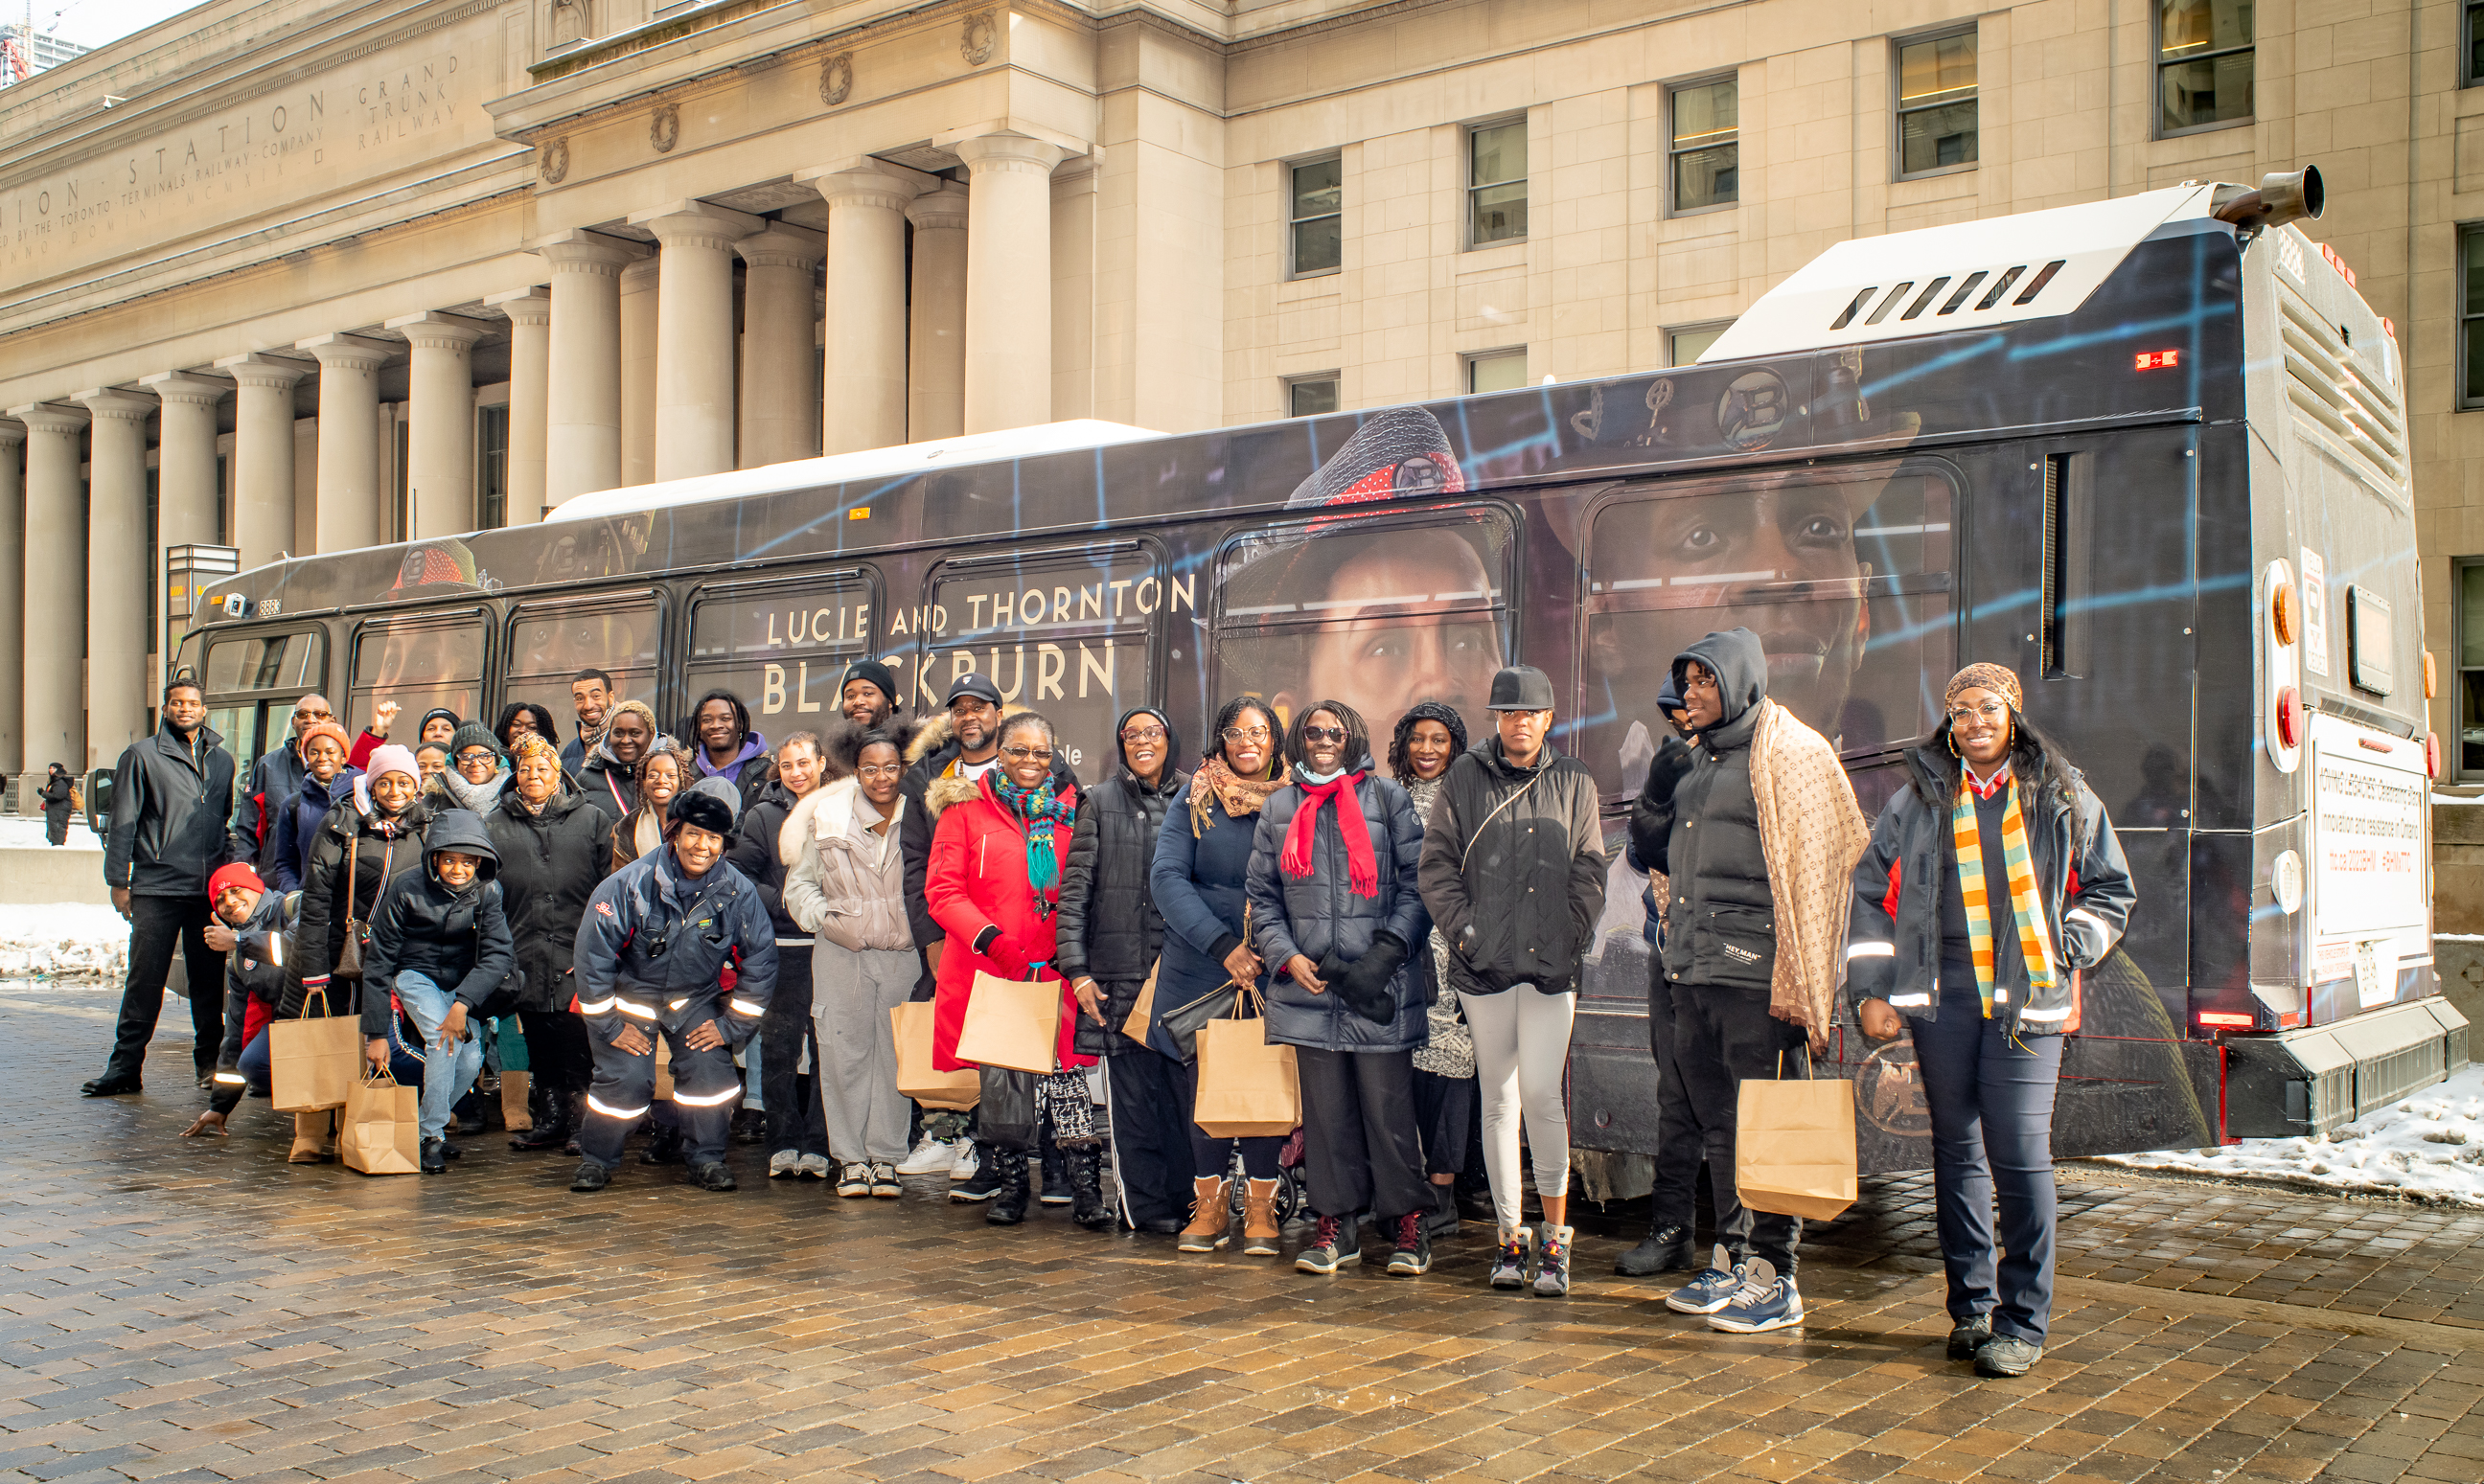 People in line on street in front of wrapped bus